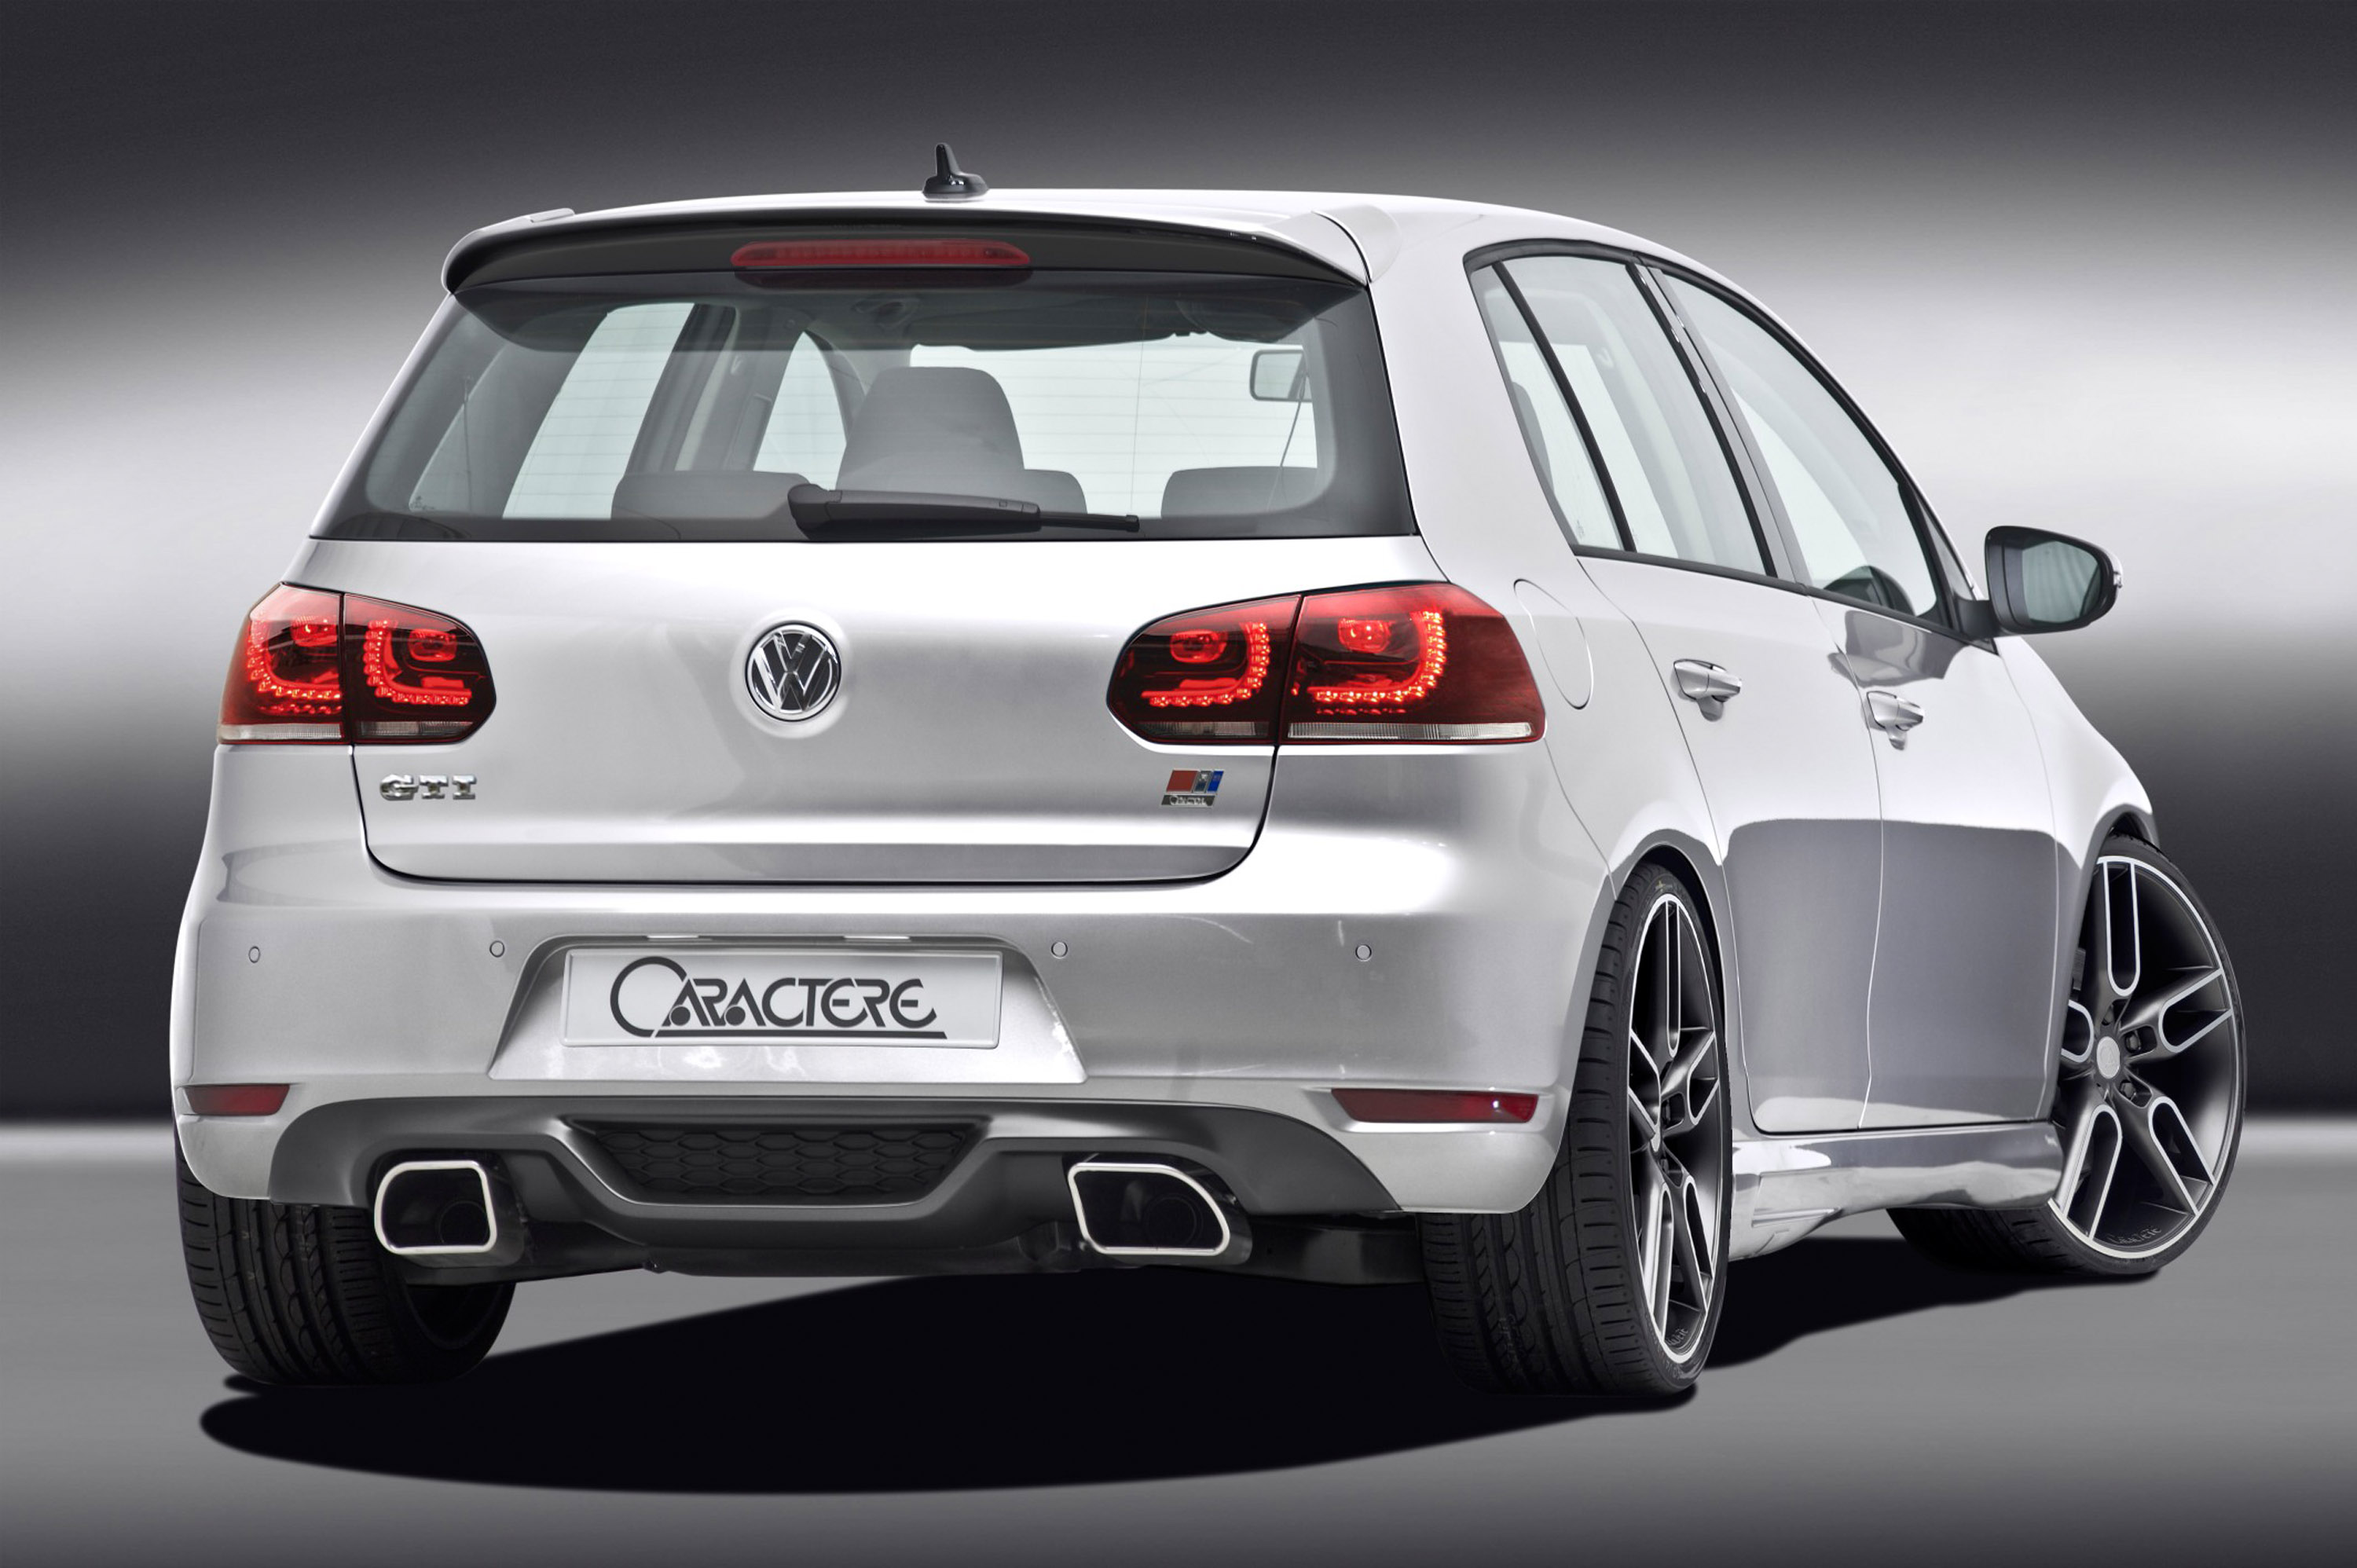 https://www.automobilesreview.com/img/caractere-vw-golf-6-gti/caractere-vw-golf-6-gti-03.jpg